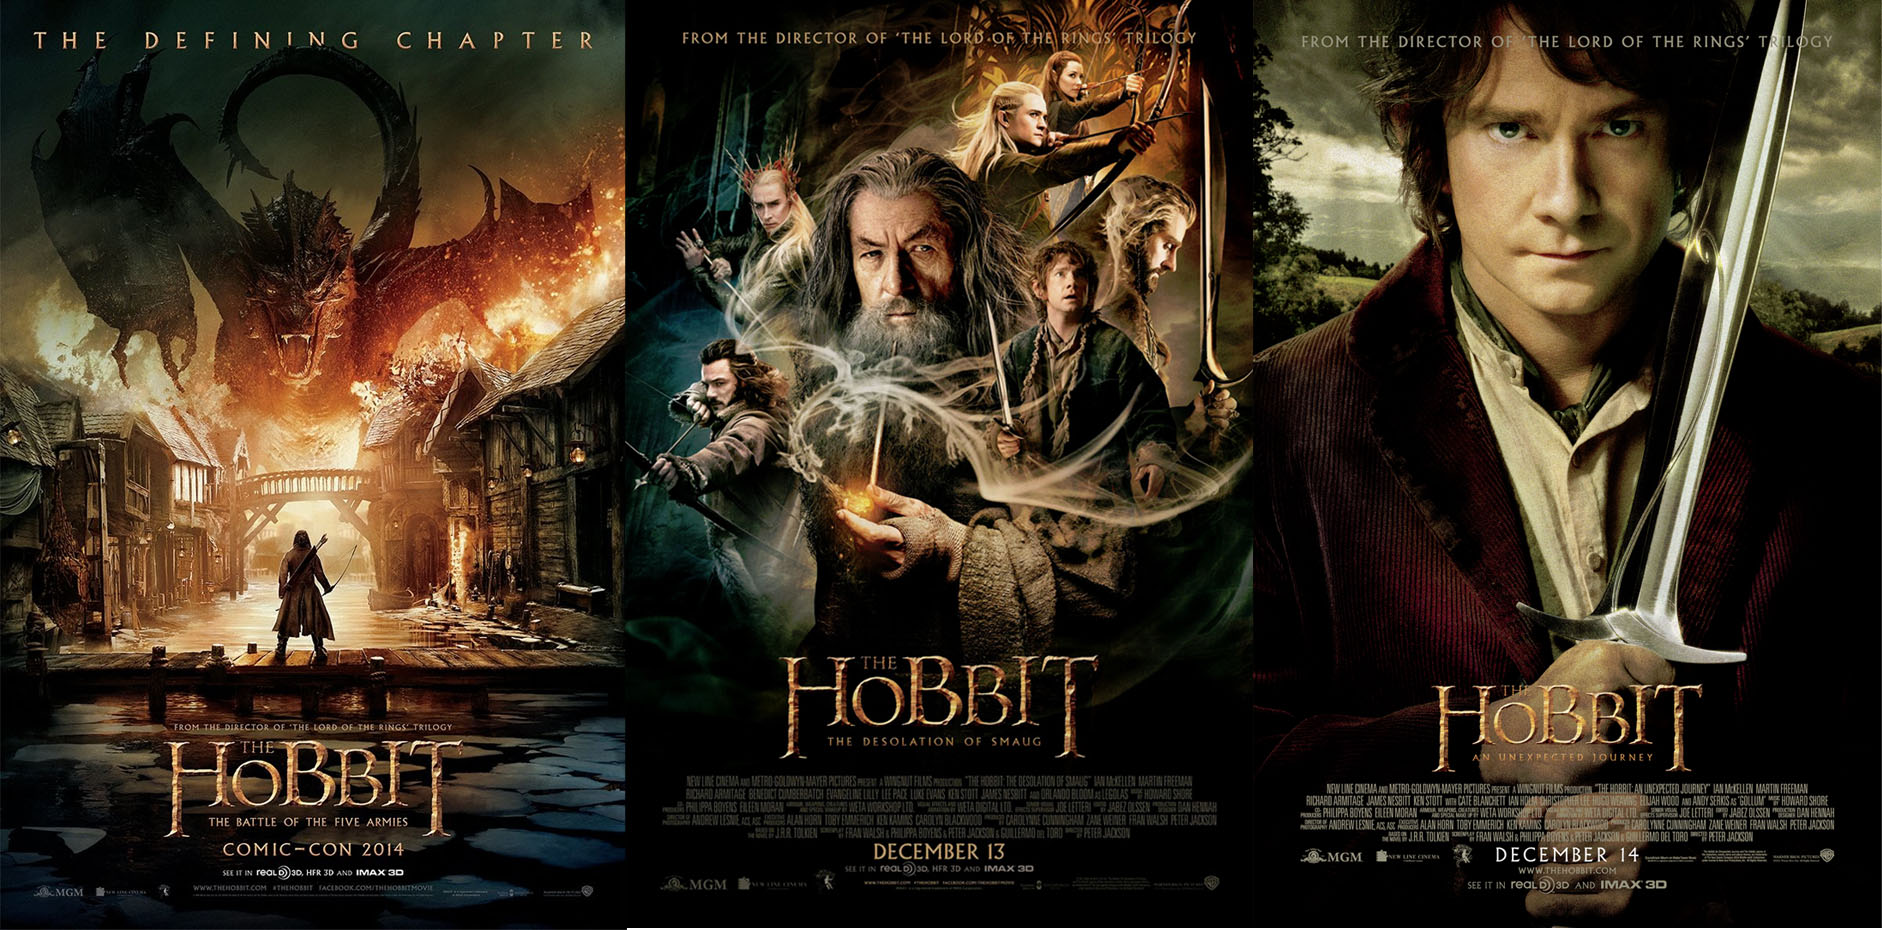 Order To Watch The Hobbit And Lord Of The Rings